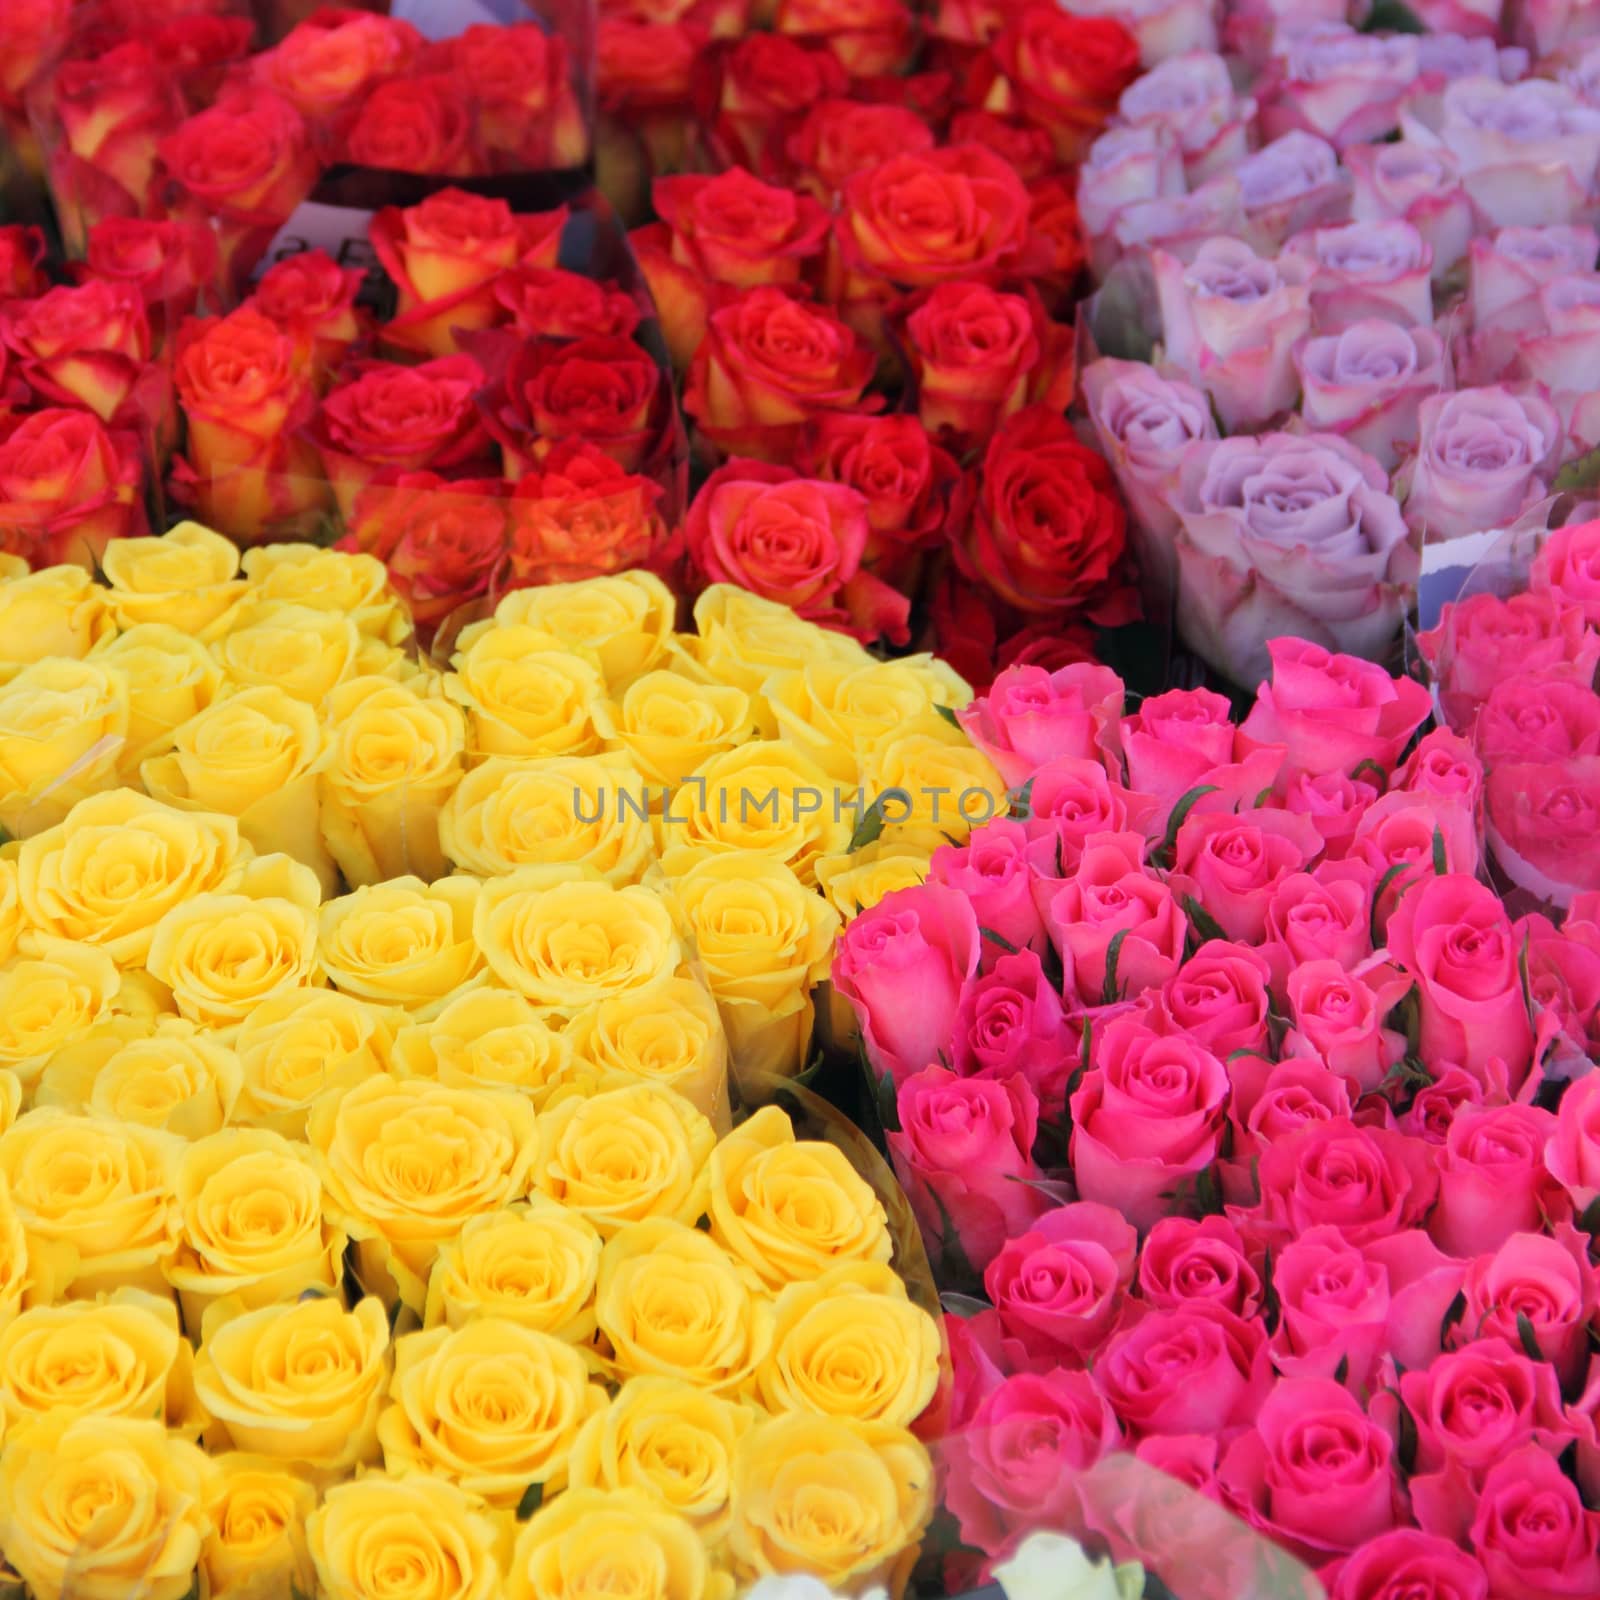 Colorful rose bouquets in flower shop